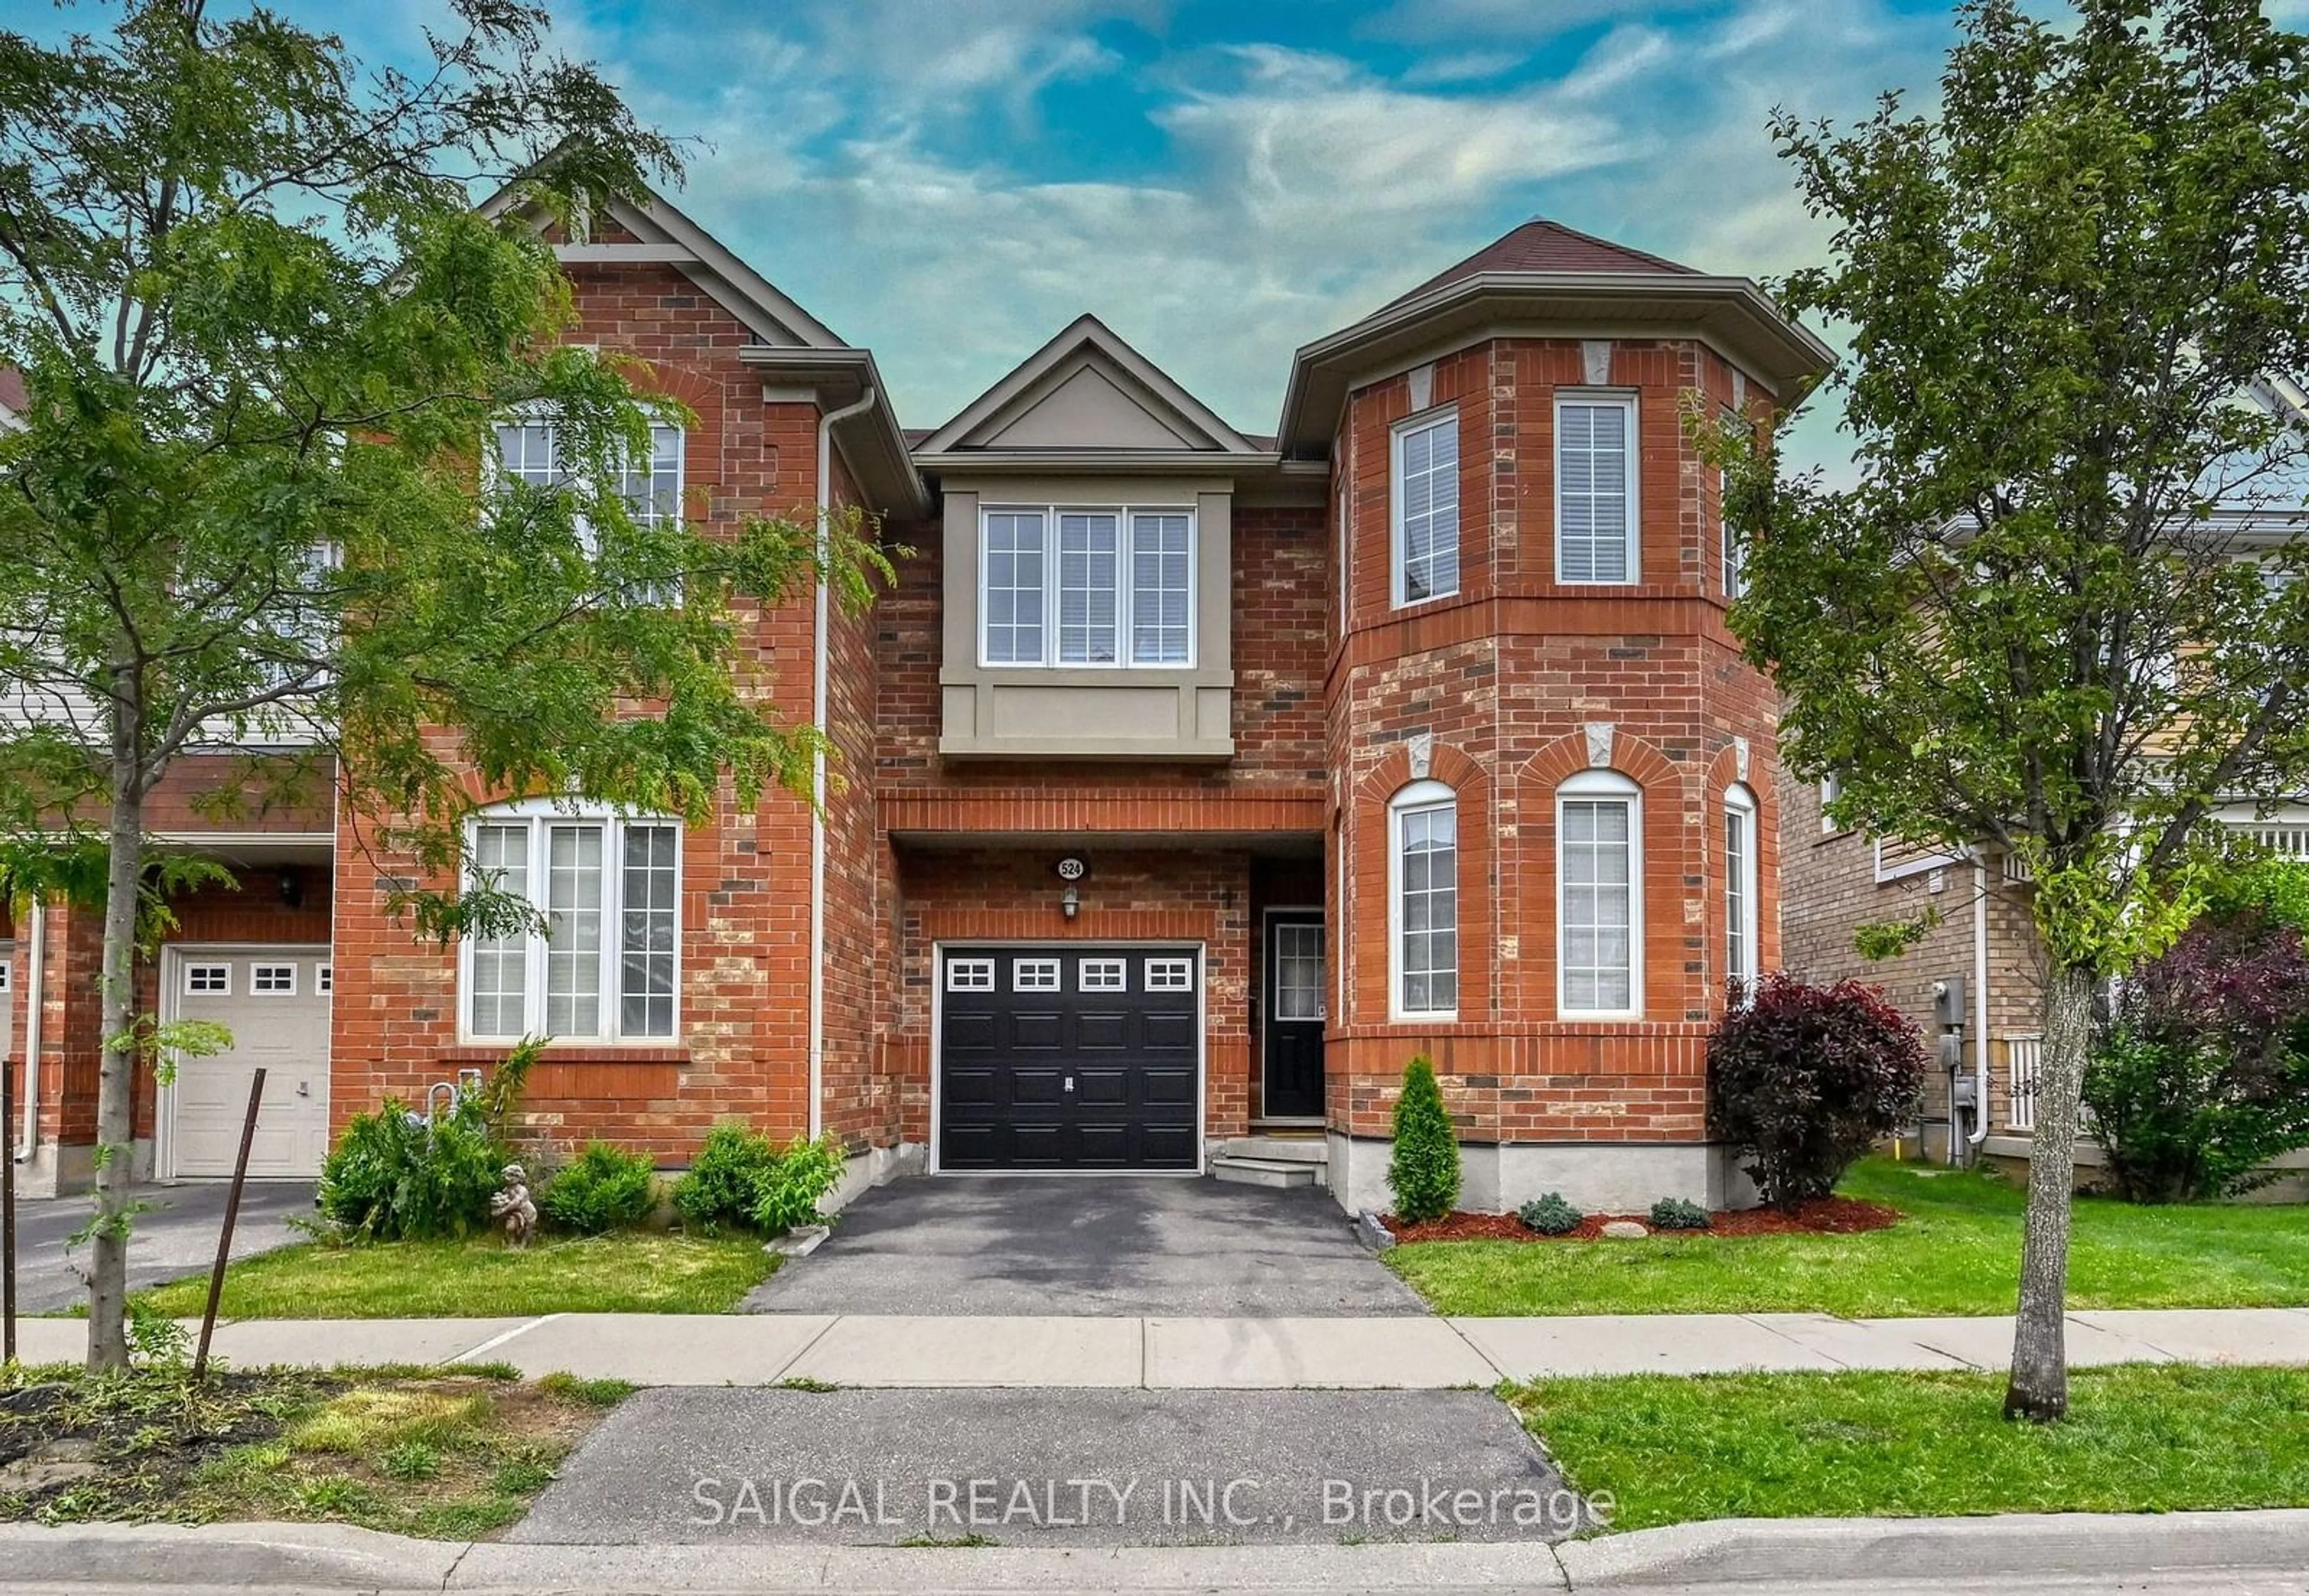 Home with brick exterior material for 524 Cavanagh Lane, Milton Ontario L9T 8B9